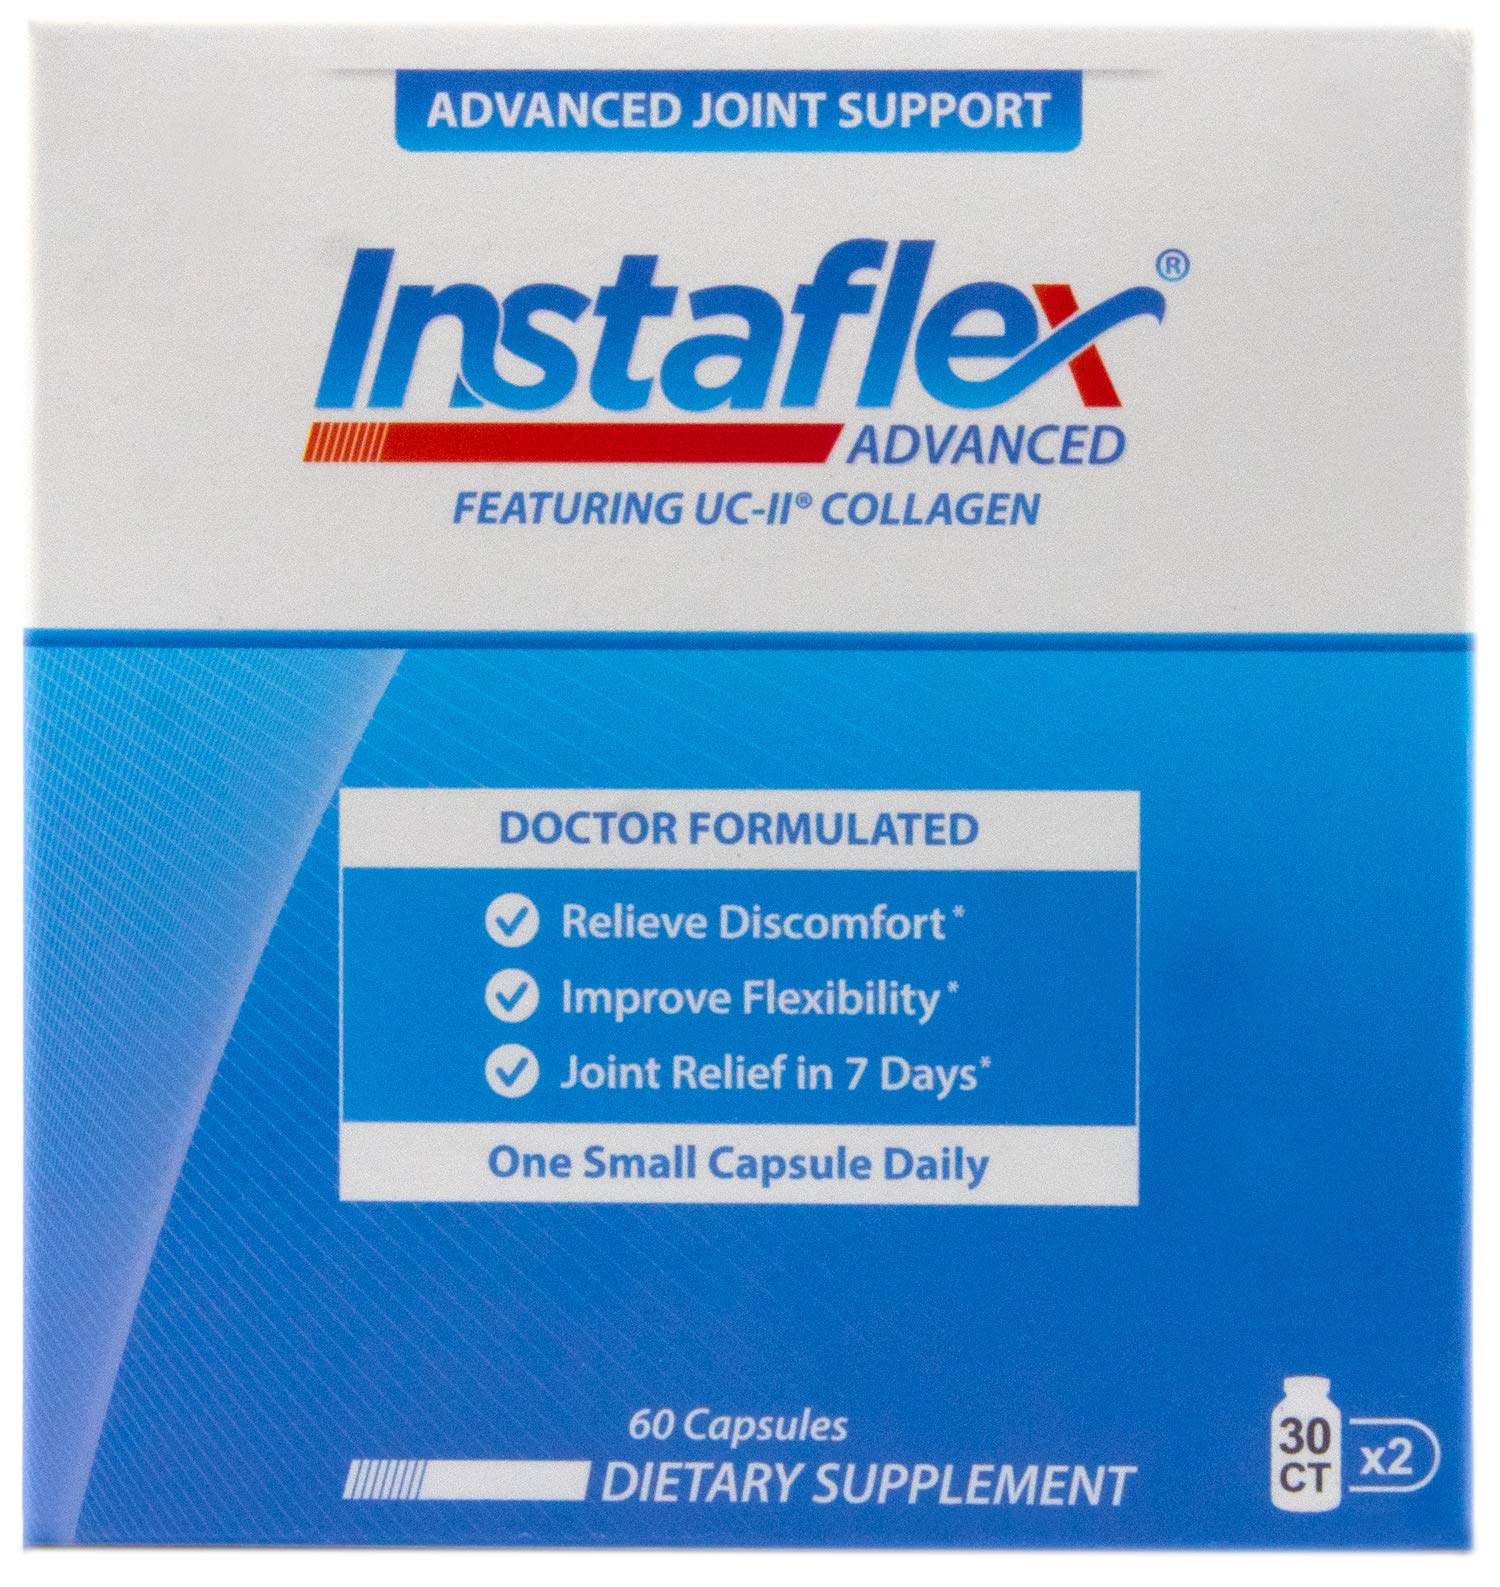 Instaflex Advanced Joint Support Nutritional Supplement Capsule with Doctor Formulated Joint Relief Supplement, Featuring UC-II Collagen & 5 Other Joint Discomfort Fighting Ingredients, 60 Ct